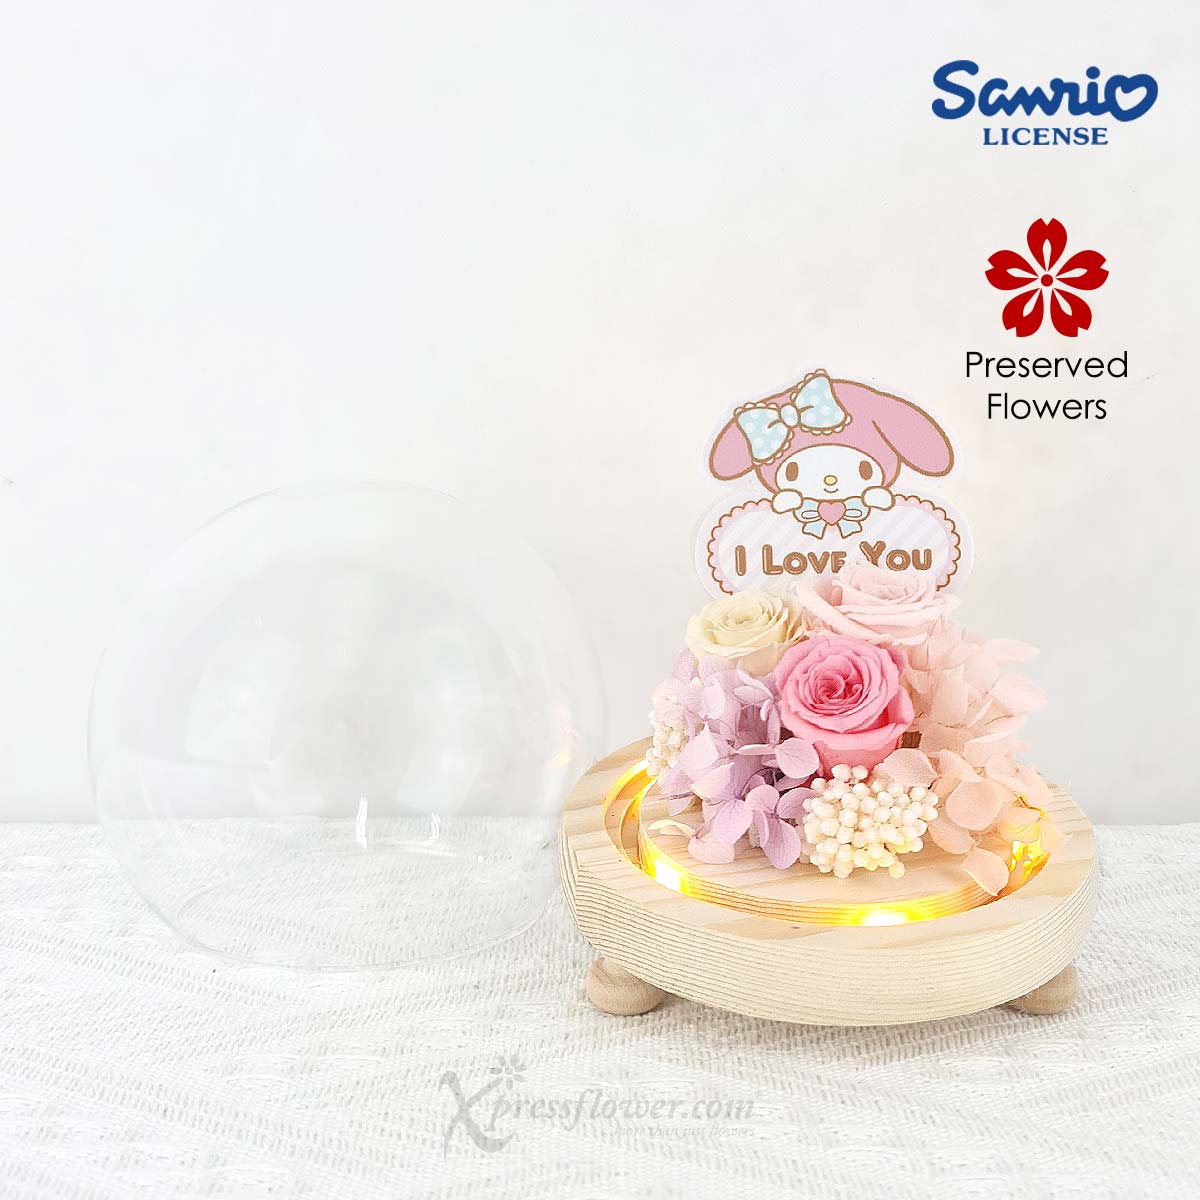 VDS2492 Melody Glow (Sanrio Preserved Flowers) 1B